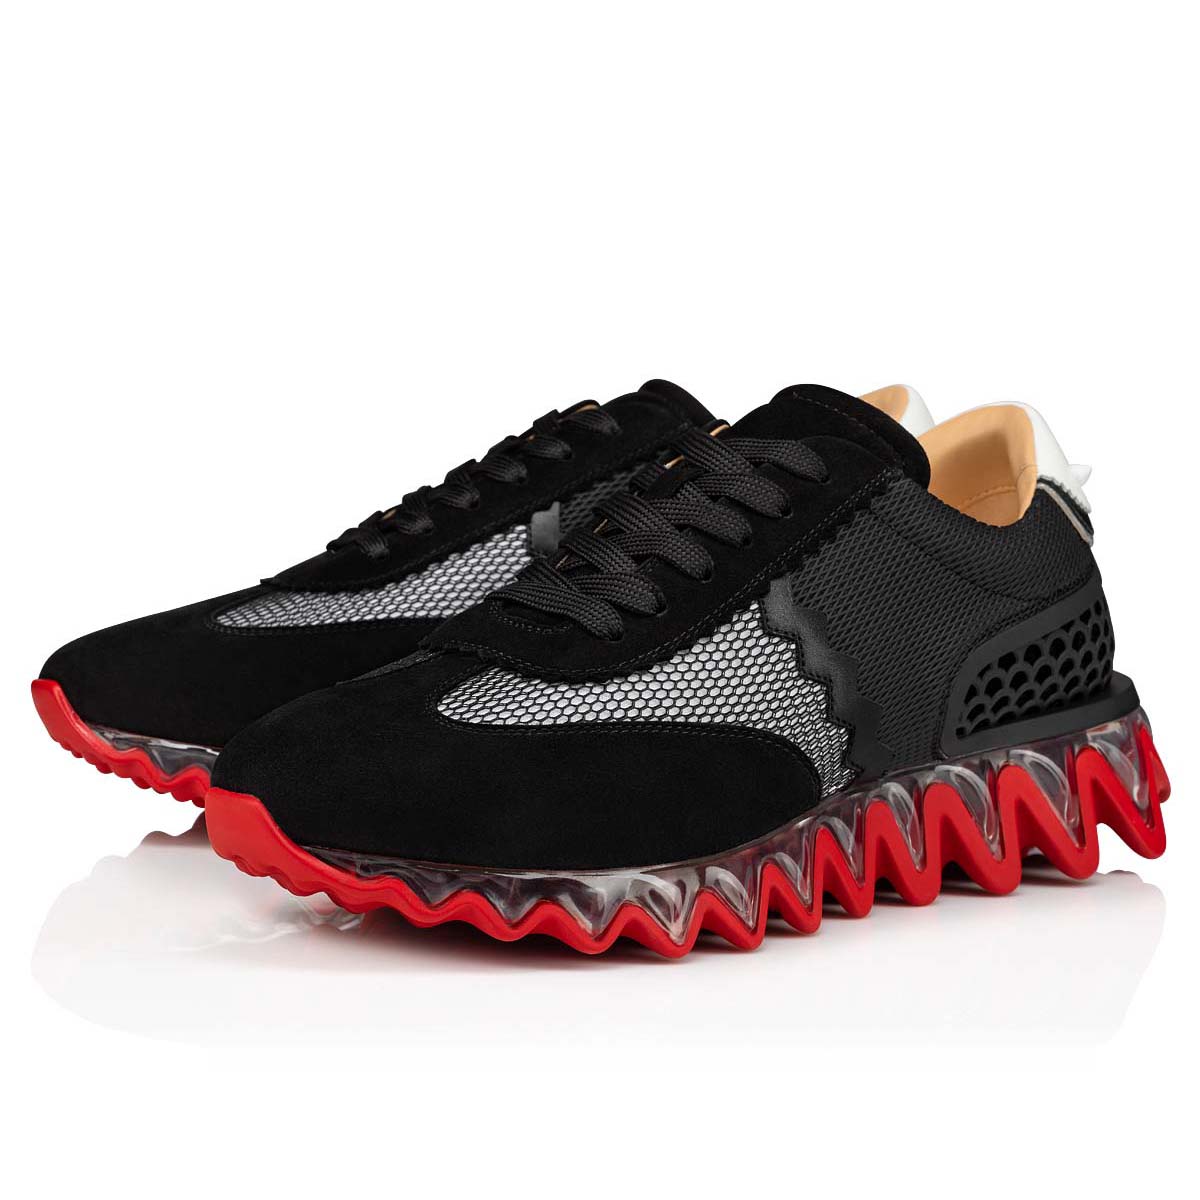 Christian Louboutin, Shoes, Black Red Bottom Sneakers